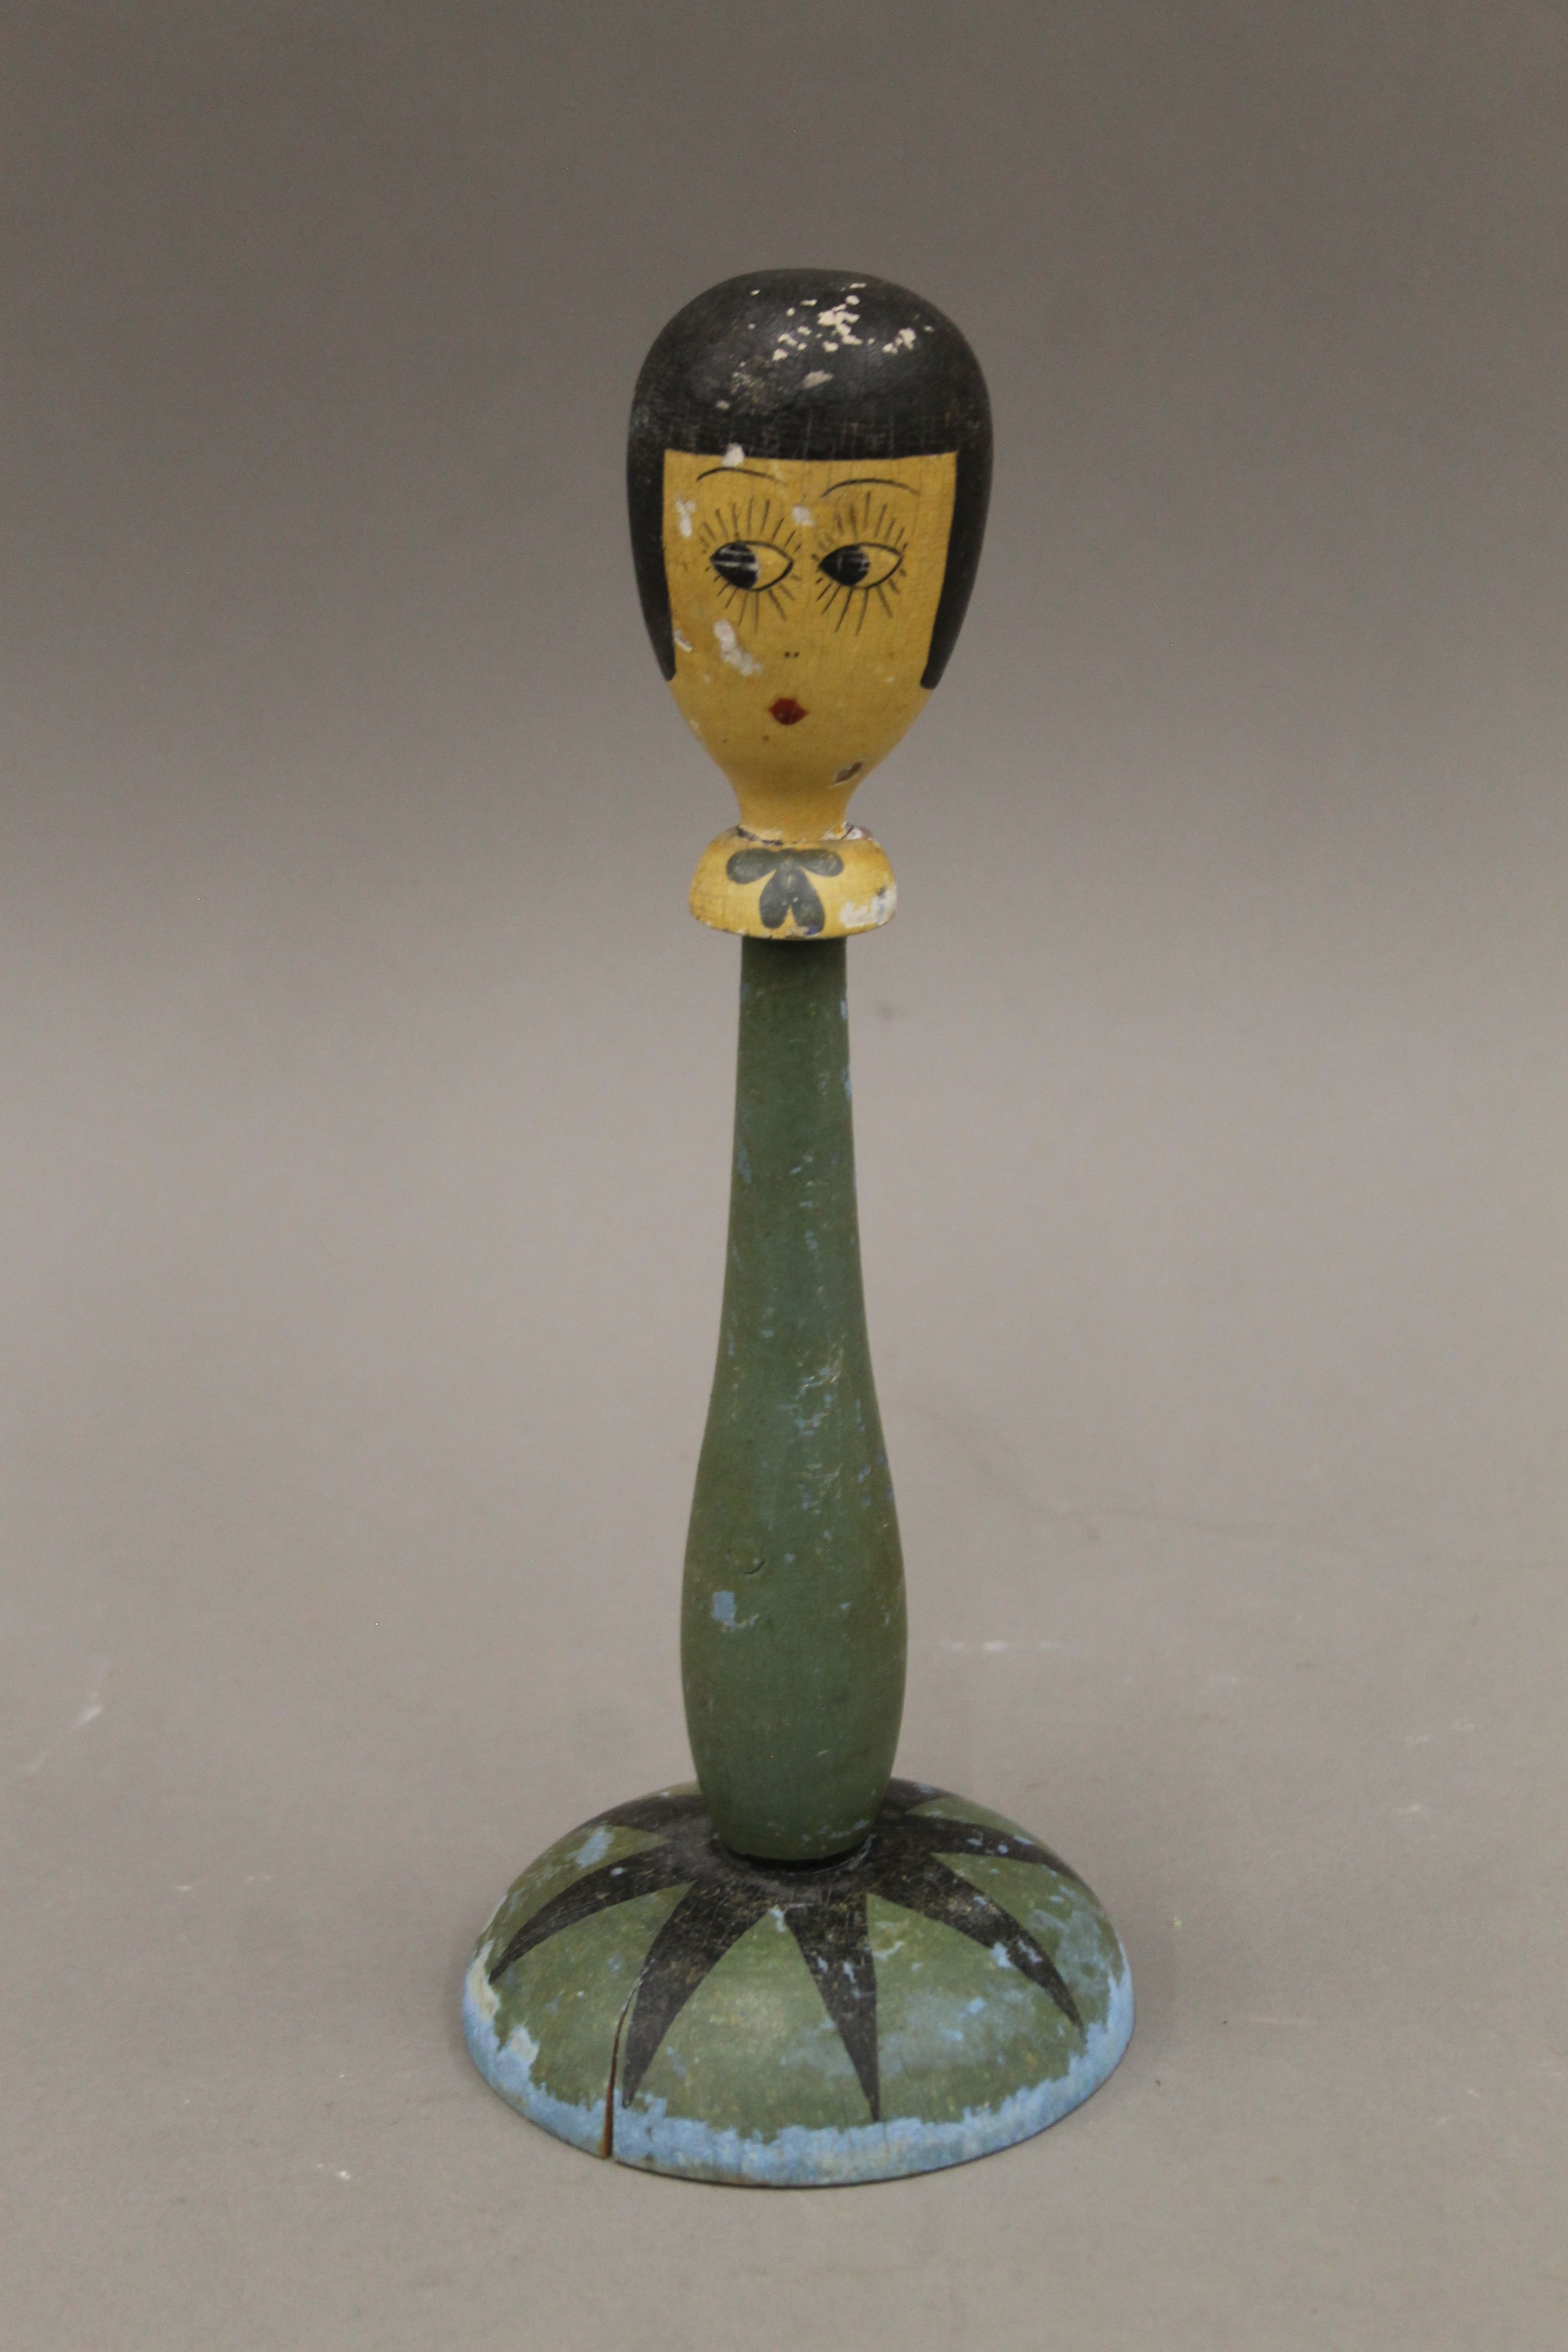 An early 20th century painted wooden display stand of female figural form. 25 cm high.